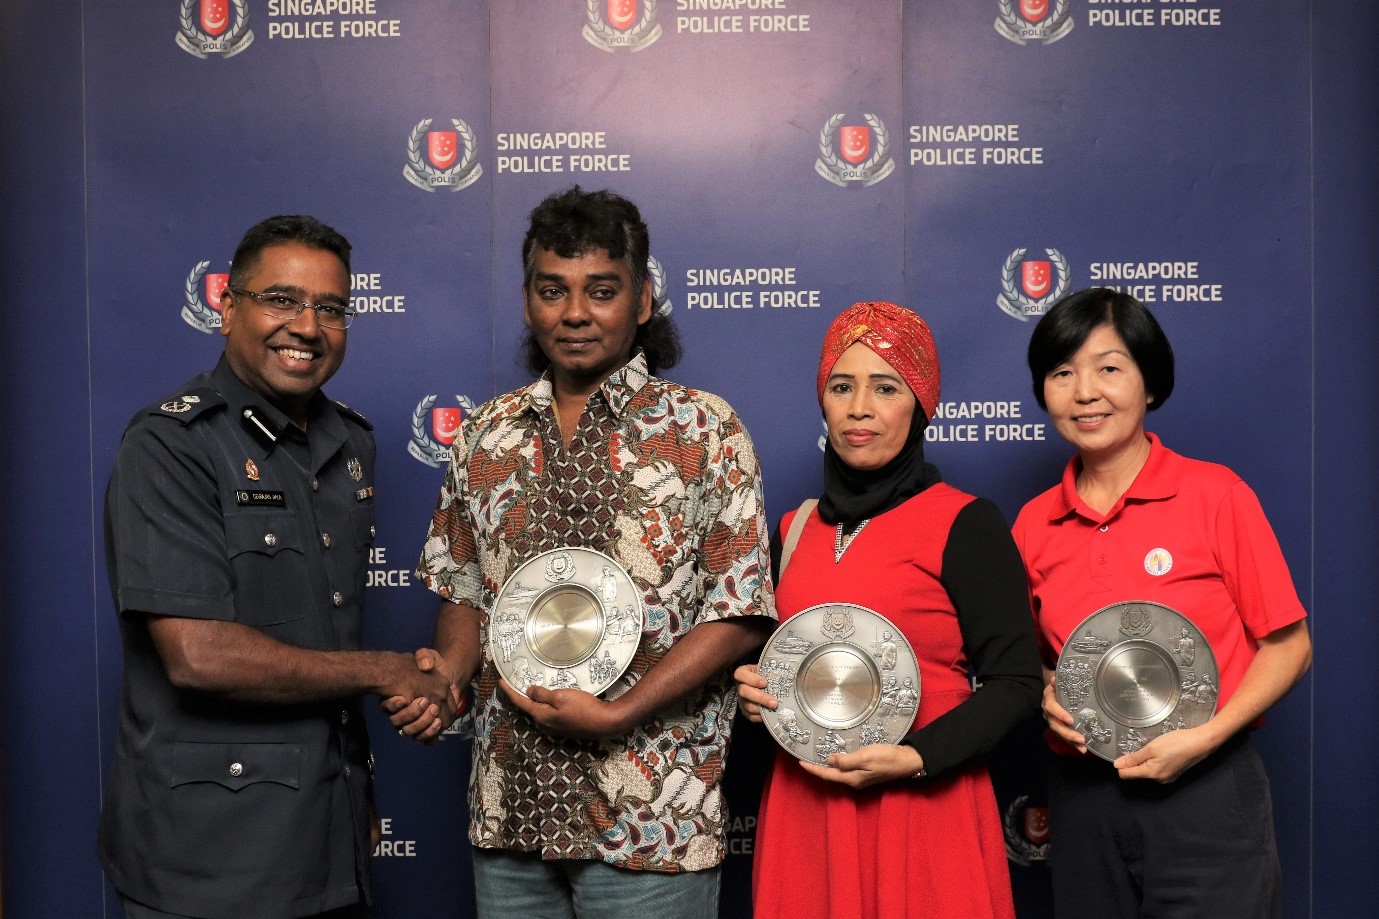 20190617_OTHERS_SIX_MEMBERS_OF_THE_PUBLIC_PRESENTED_WITH_PUBLIC_SPIRITEDNESS_AWARDS_AND_22_ORGANISATIONS_PRESENTED_WITH_COMMUNITY_PARTNERSHIP_AWARDS_2